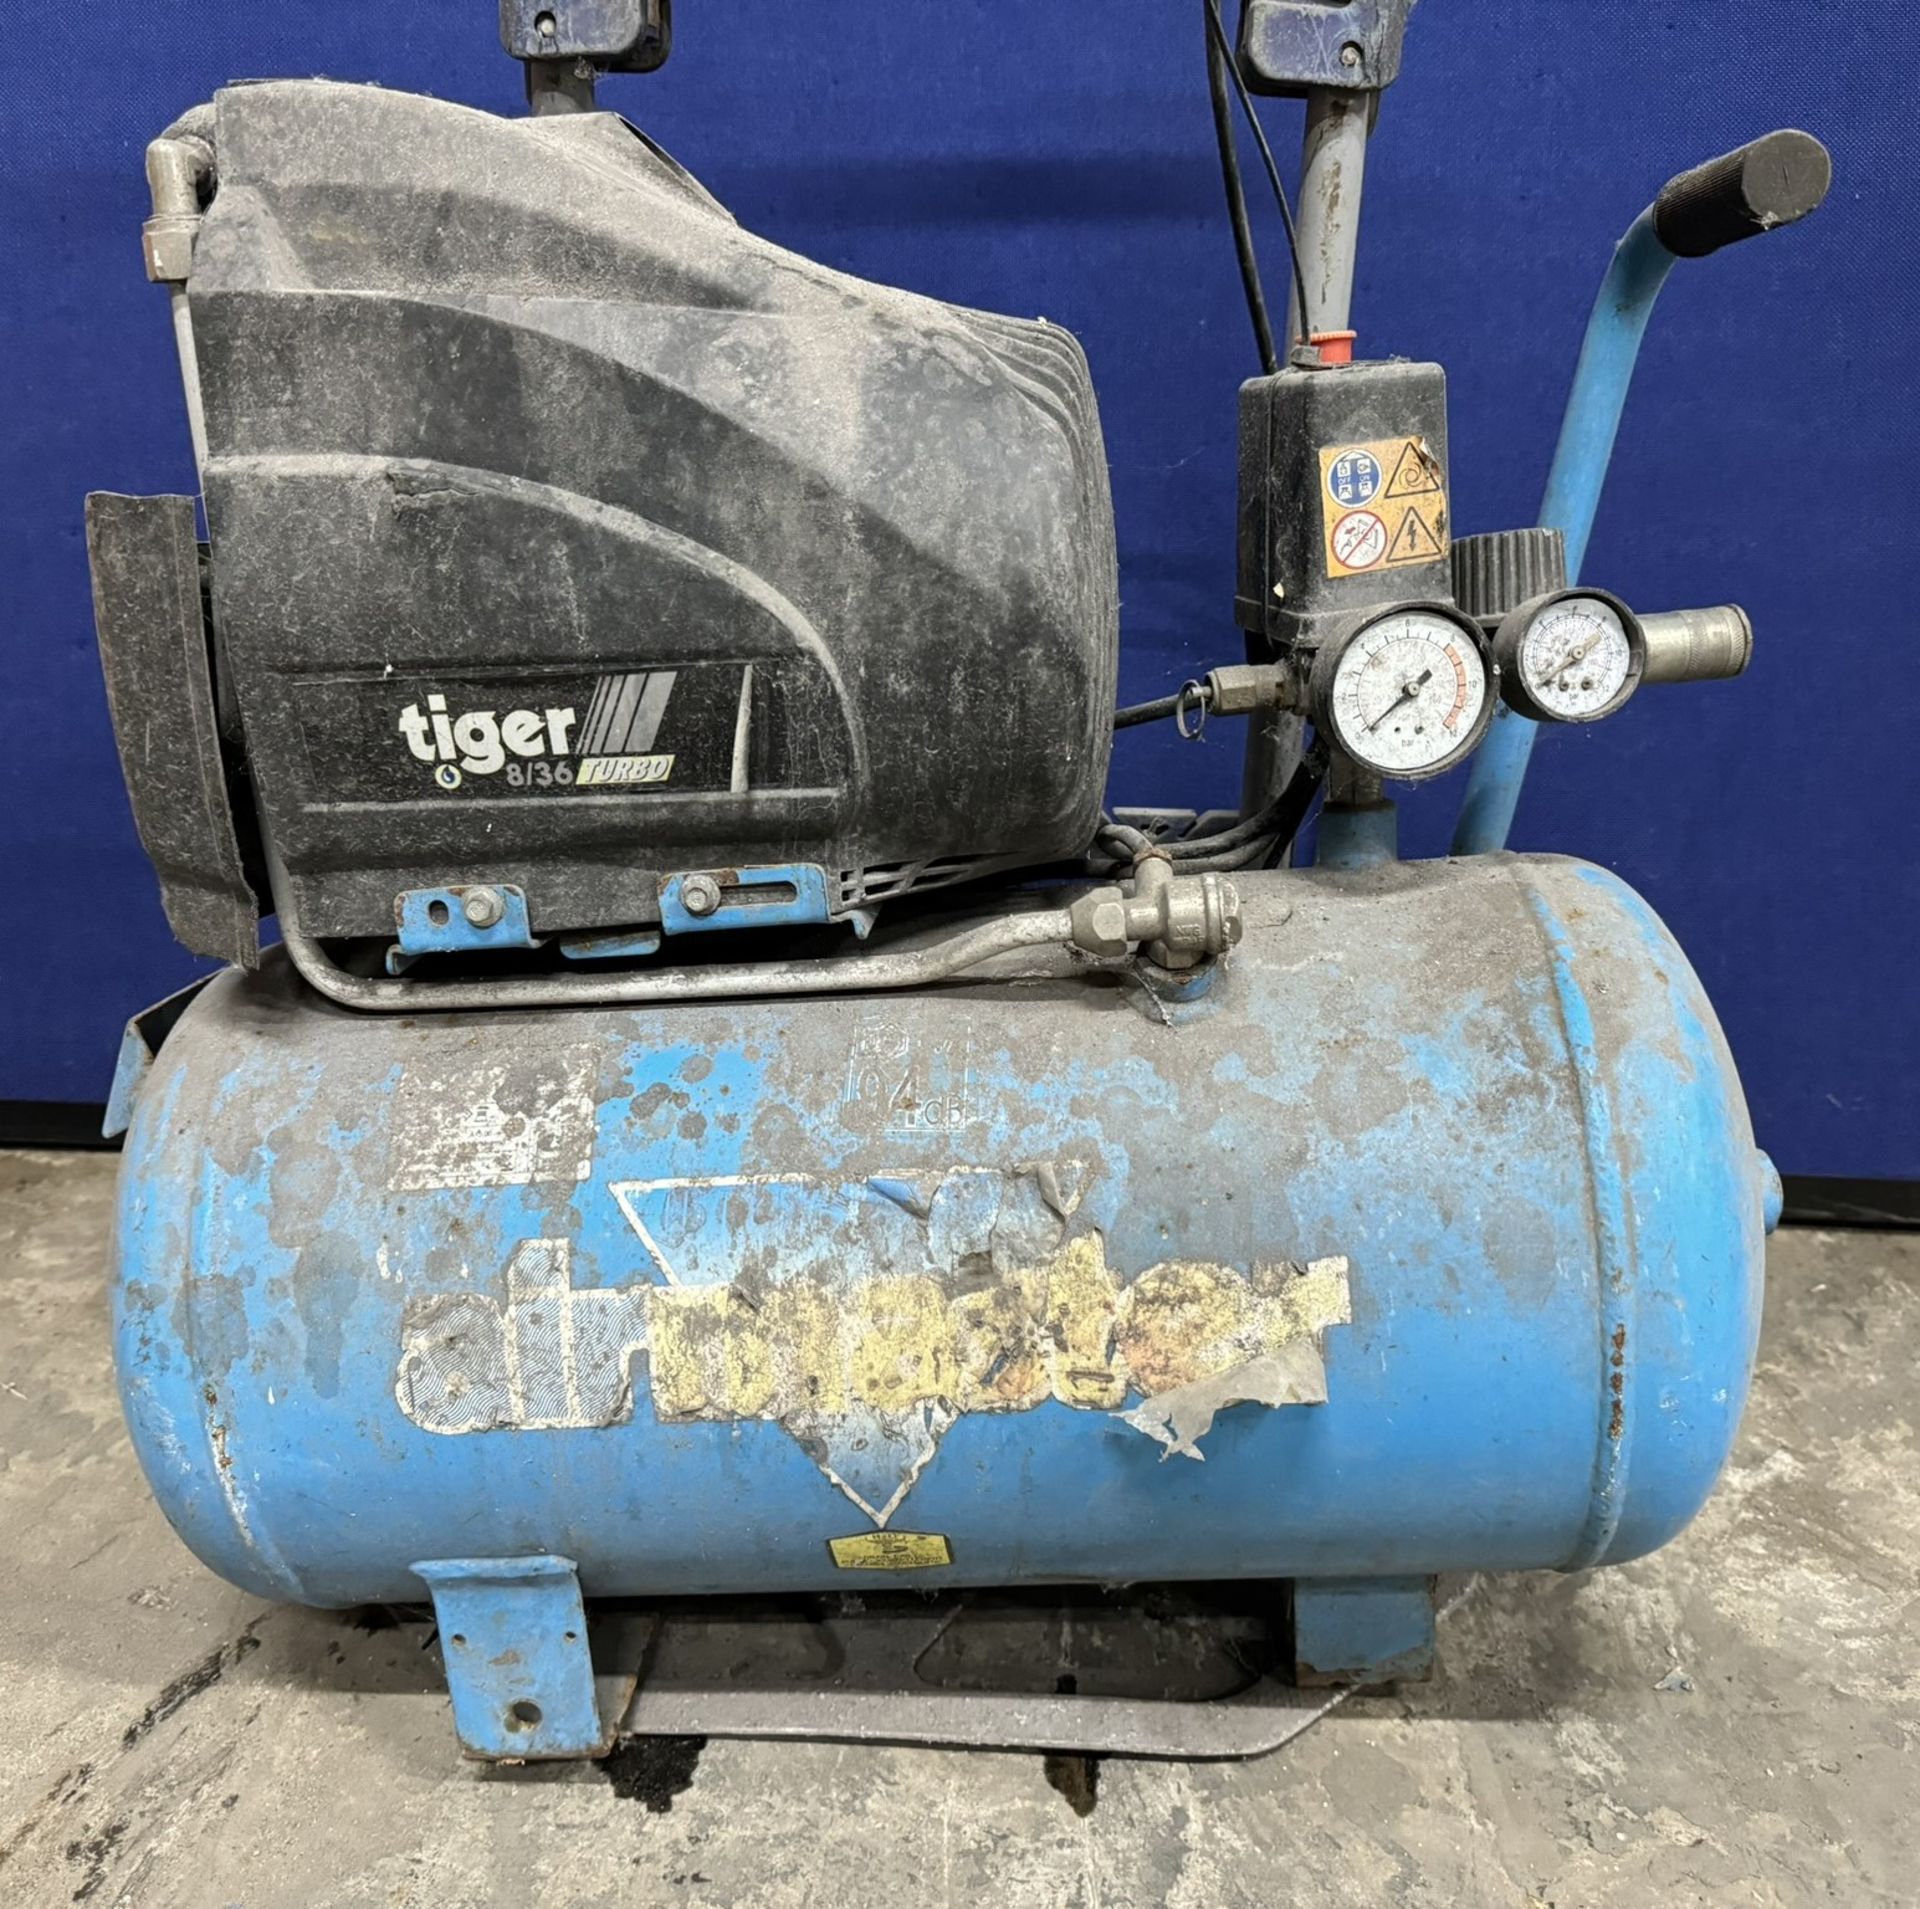 Airmaster Tiger 8/36 Turbo Mobile Air Compressor - Image 2 of 6